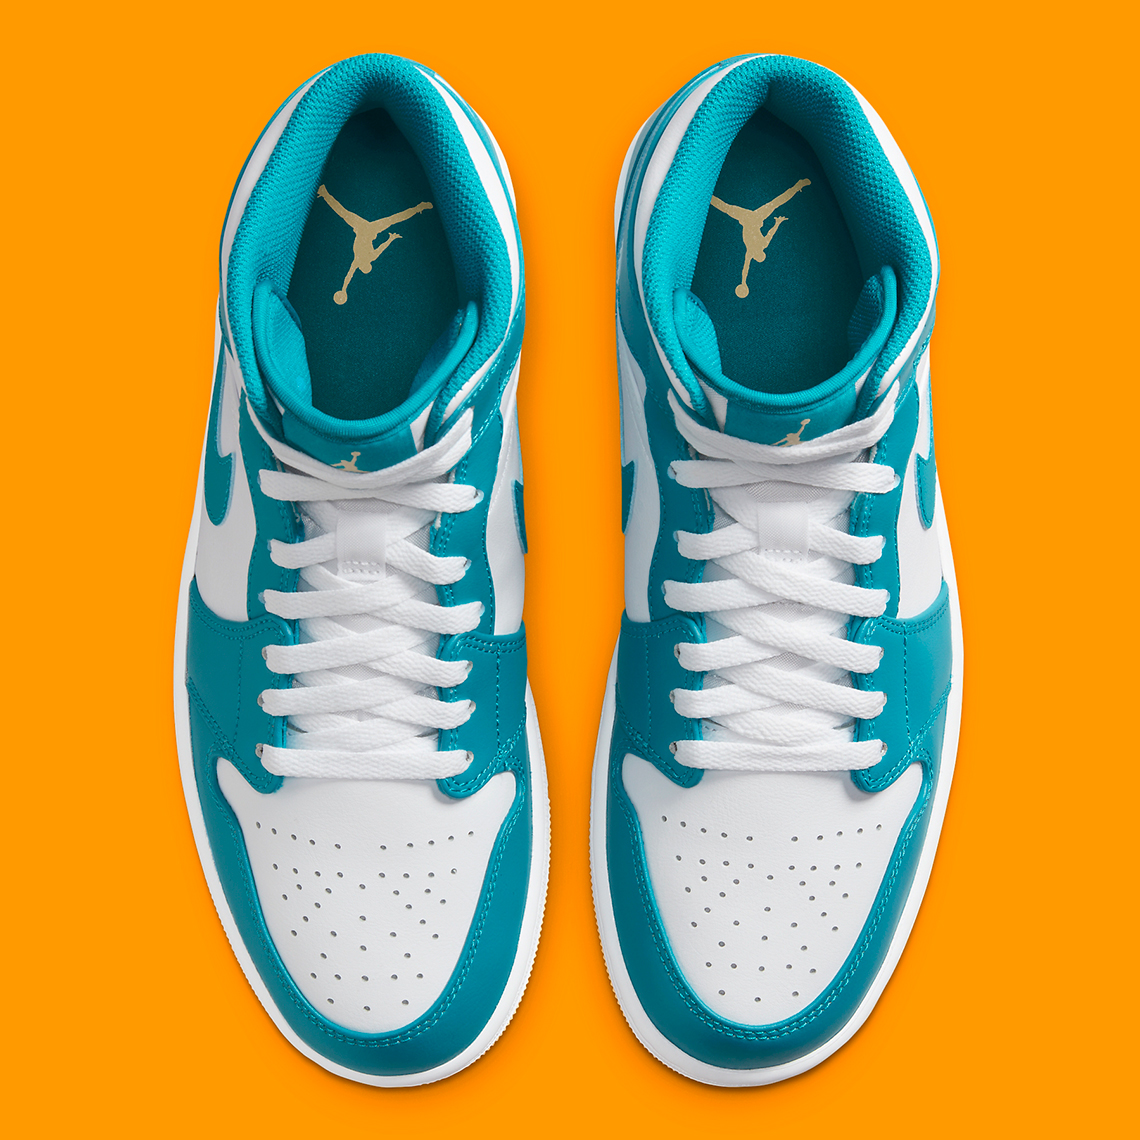 The Women's Air Jordan 1 Mid Brightens Up With Aqua And Peach